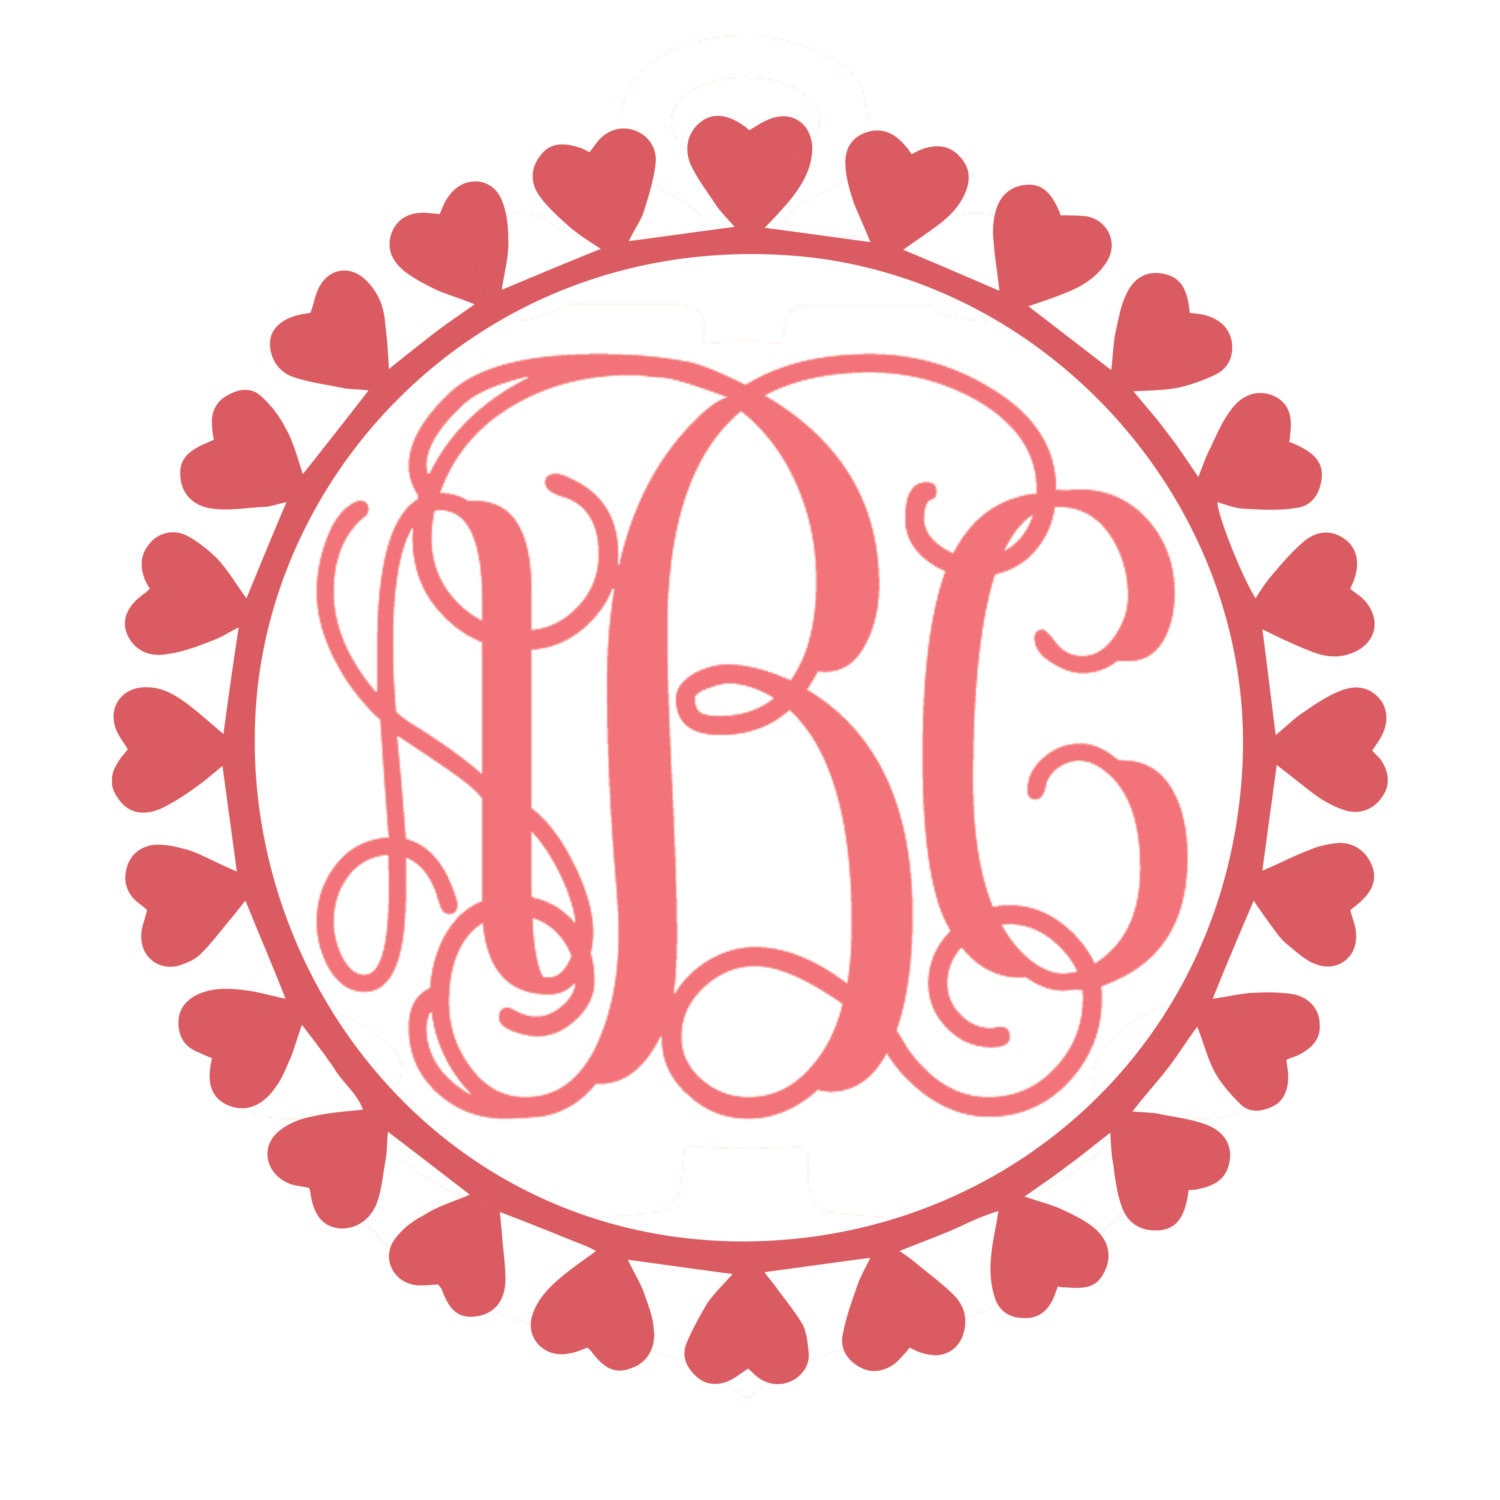 Heart Monogram Frame Cutting Files in Svg Eps Dxf Png and